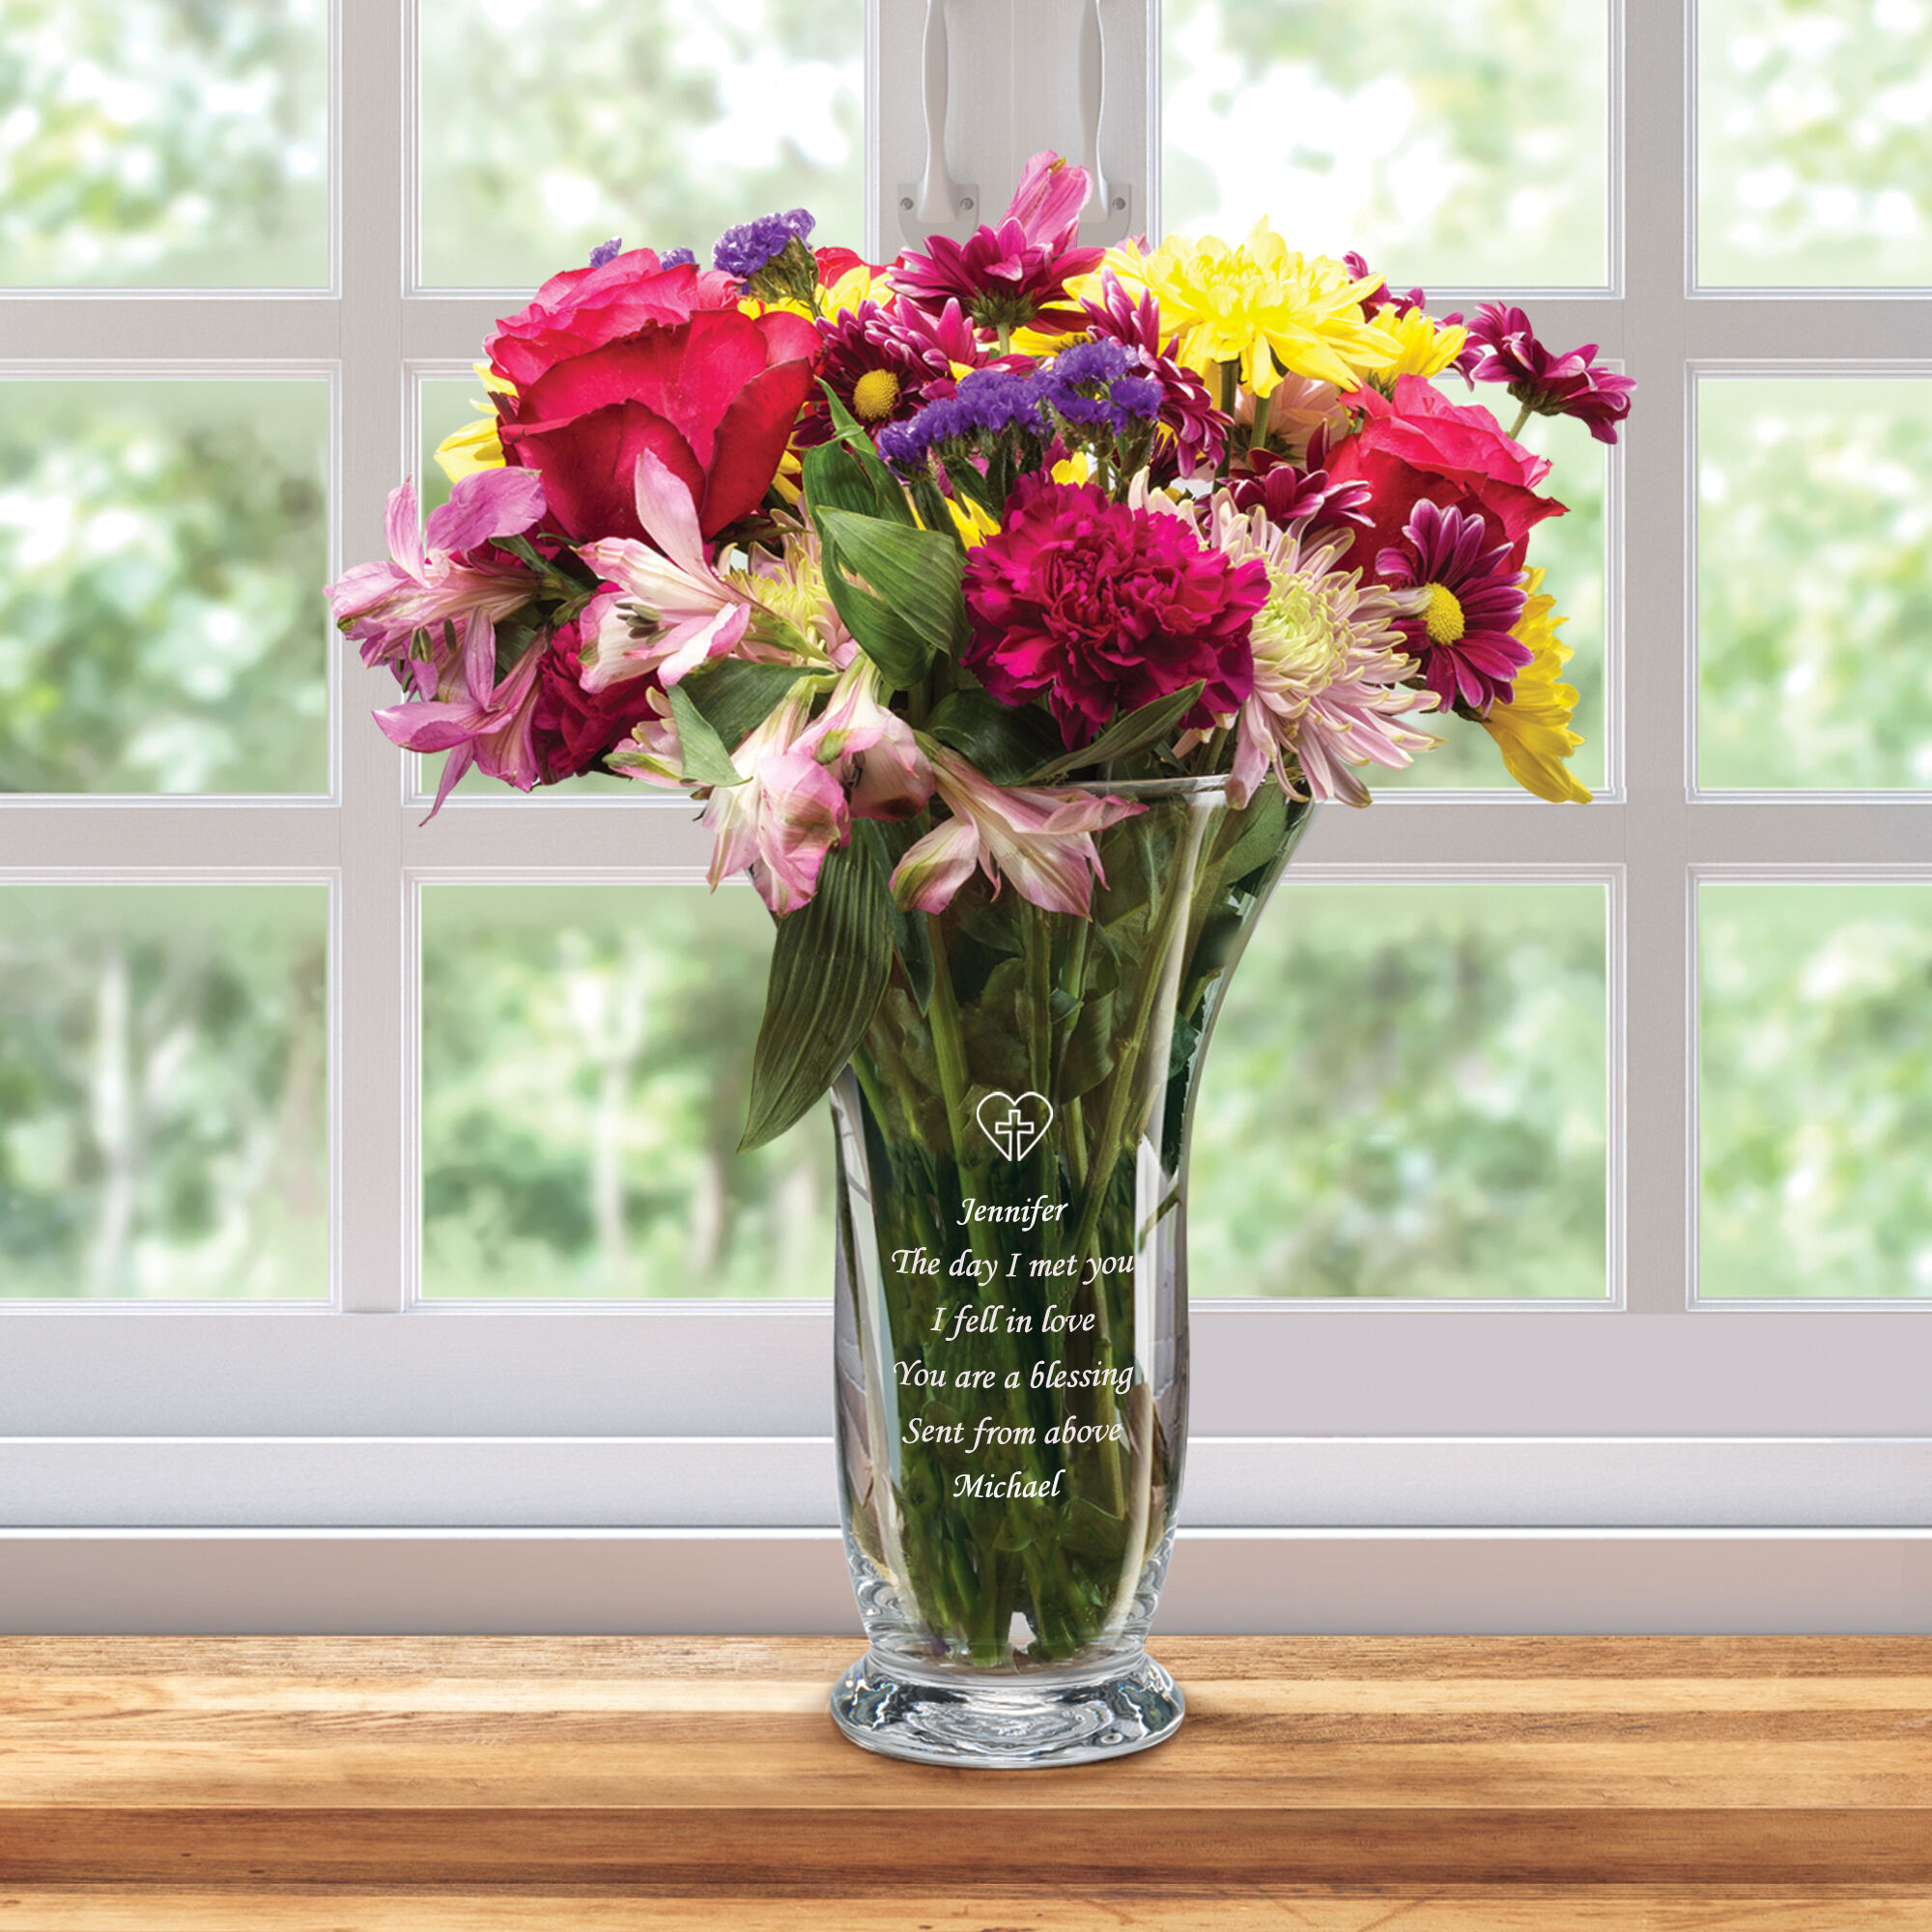 The Personalized Blessing Vase 10157 0034 c flower